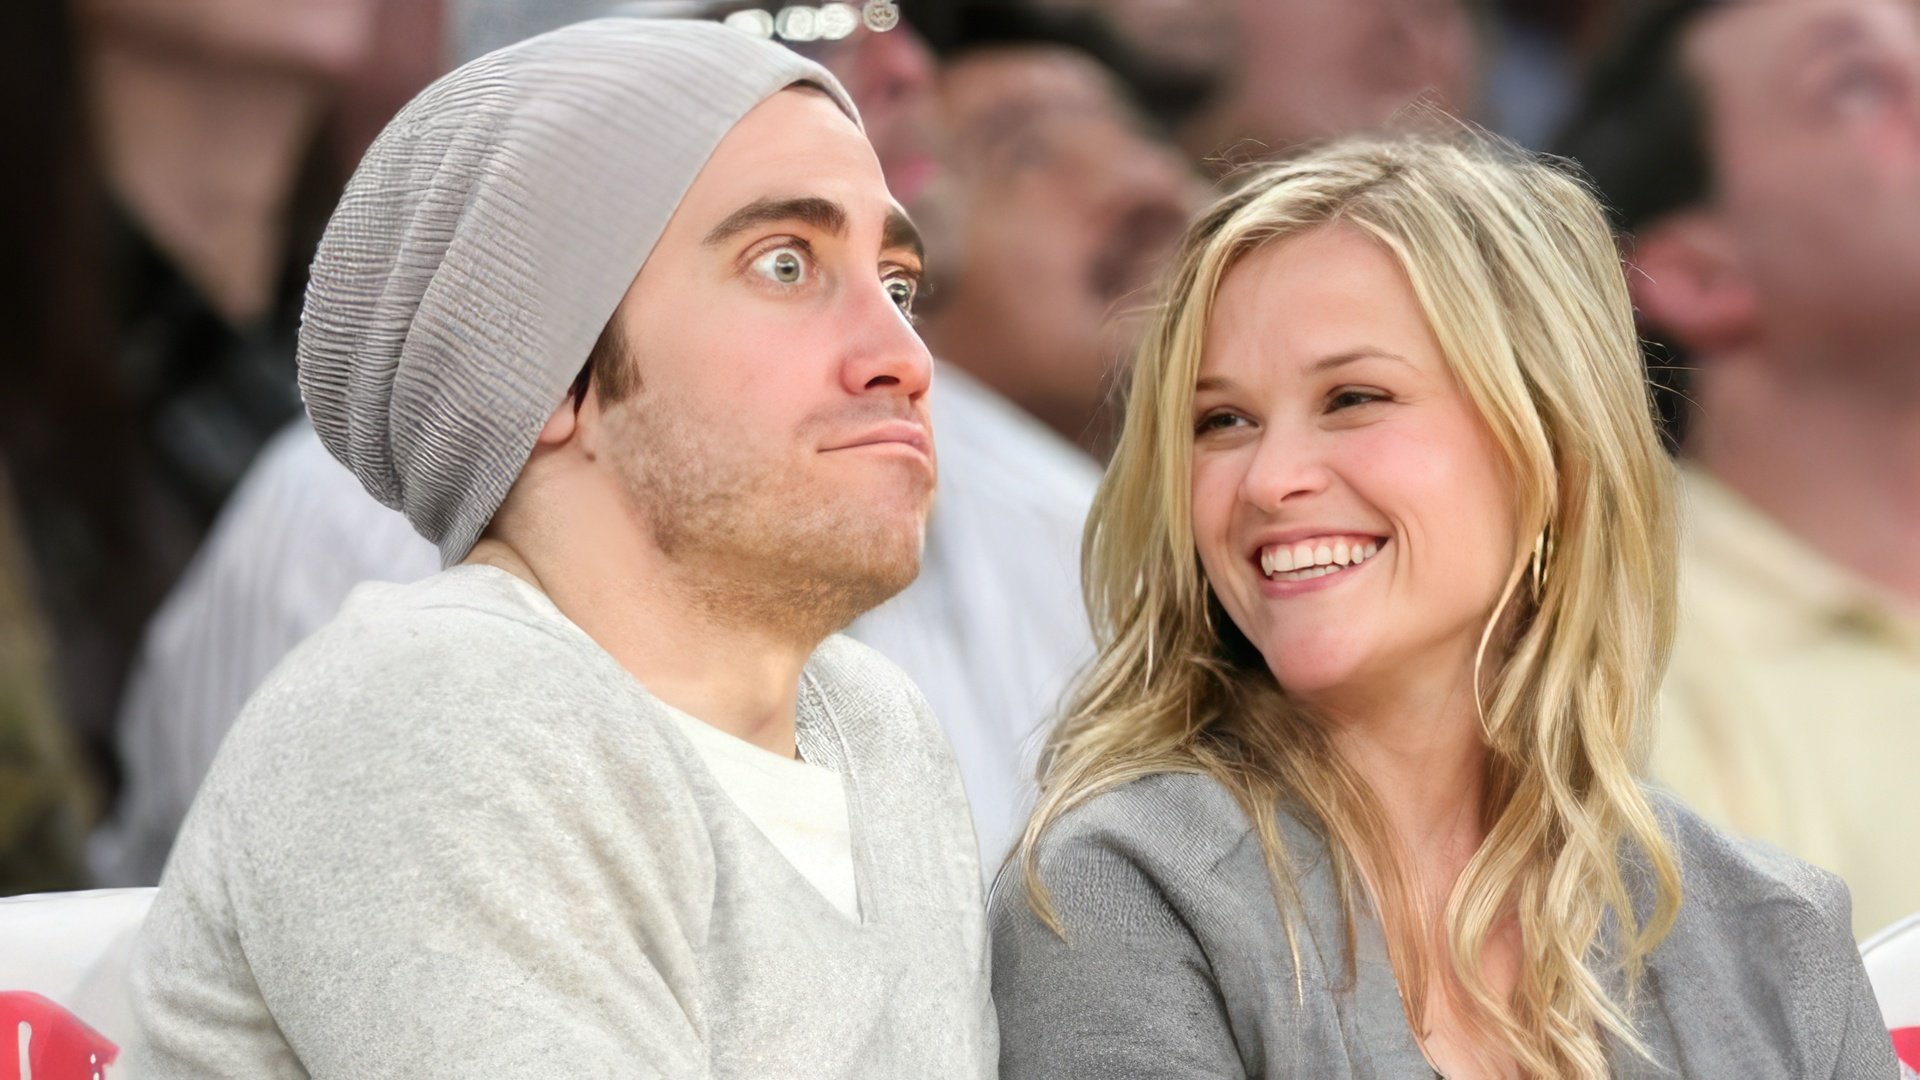 Jake Gyllenhaal Took Their Breakup with Reese Witherspoon Pretty Hard